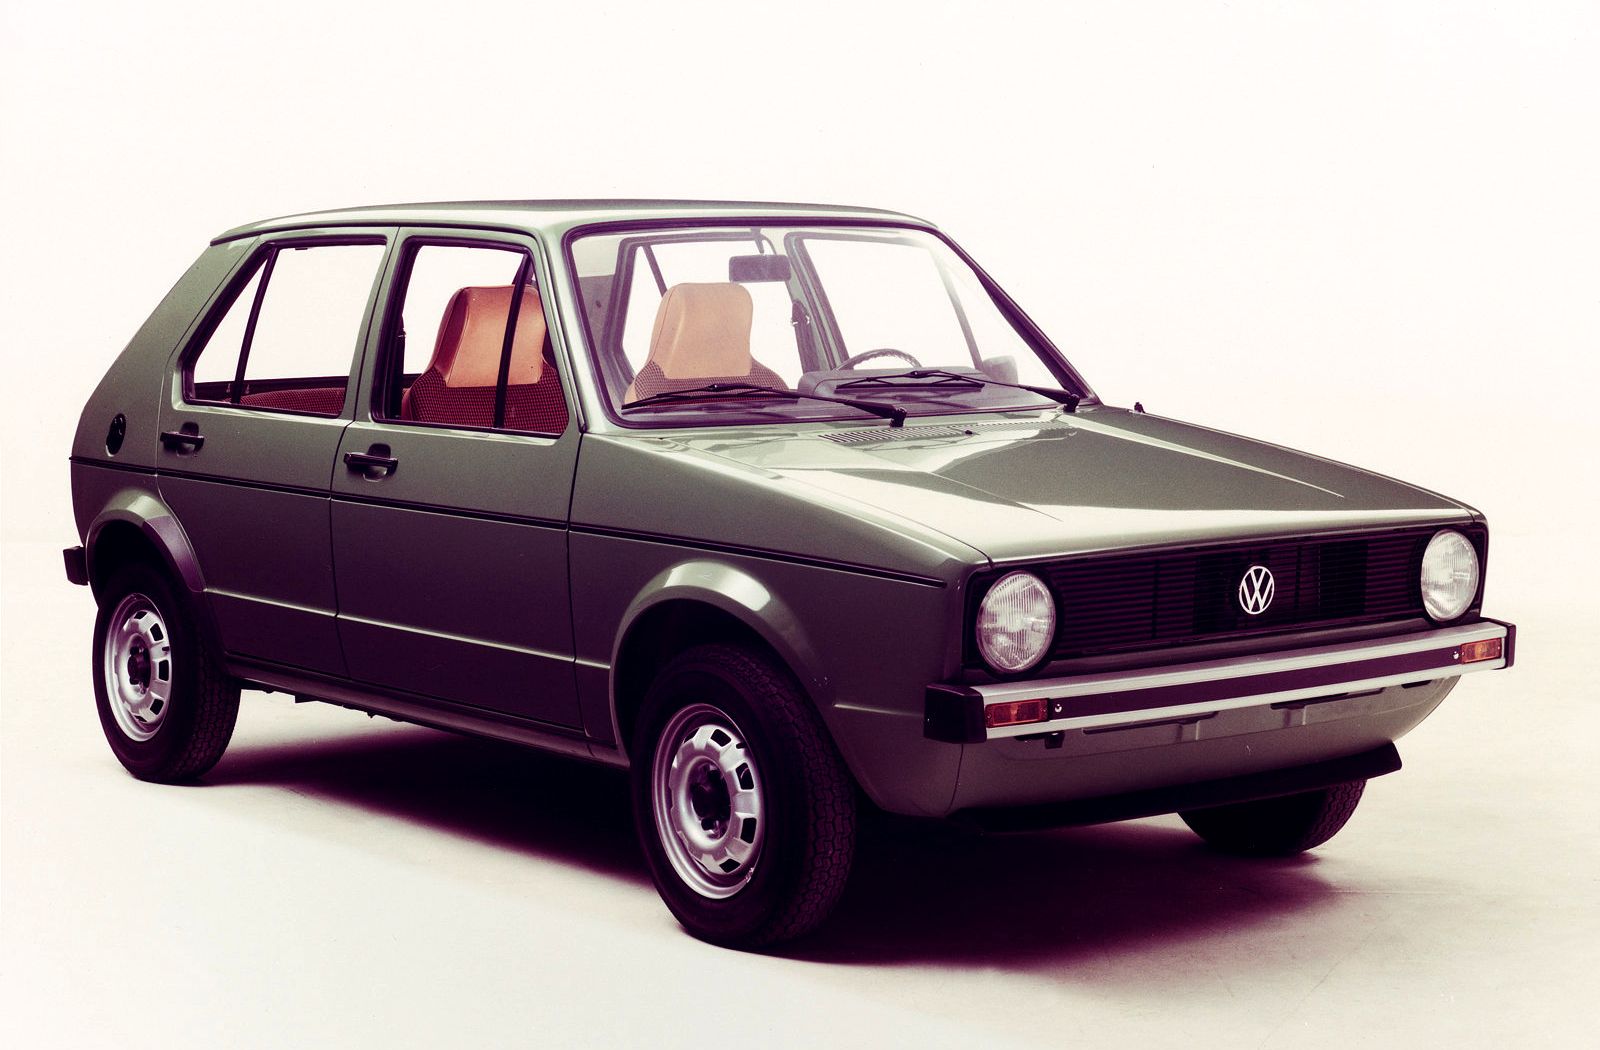 Arab Luchtvaartmaatschappijen Botsing Here Are Five Interesting Facts About the VW Golf You Probably Never Knew -  autoevolution